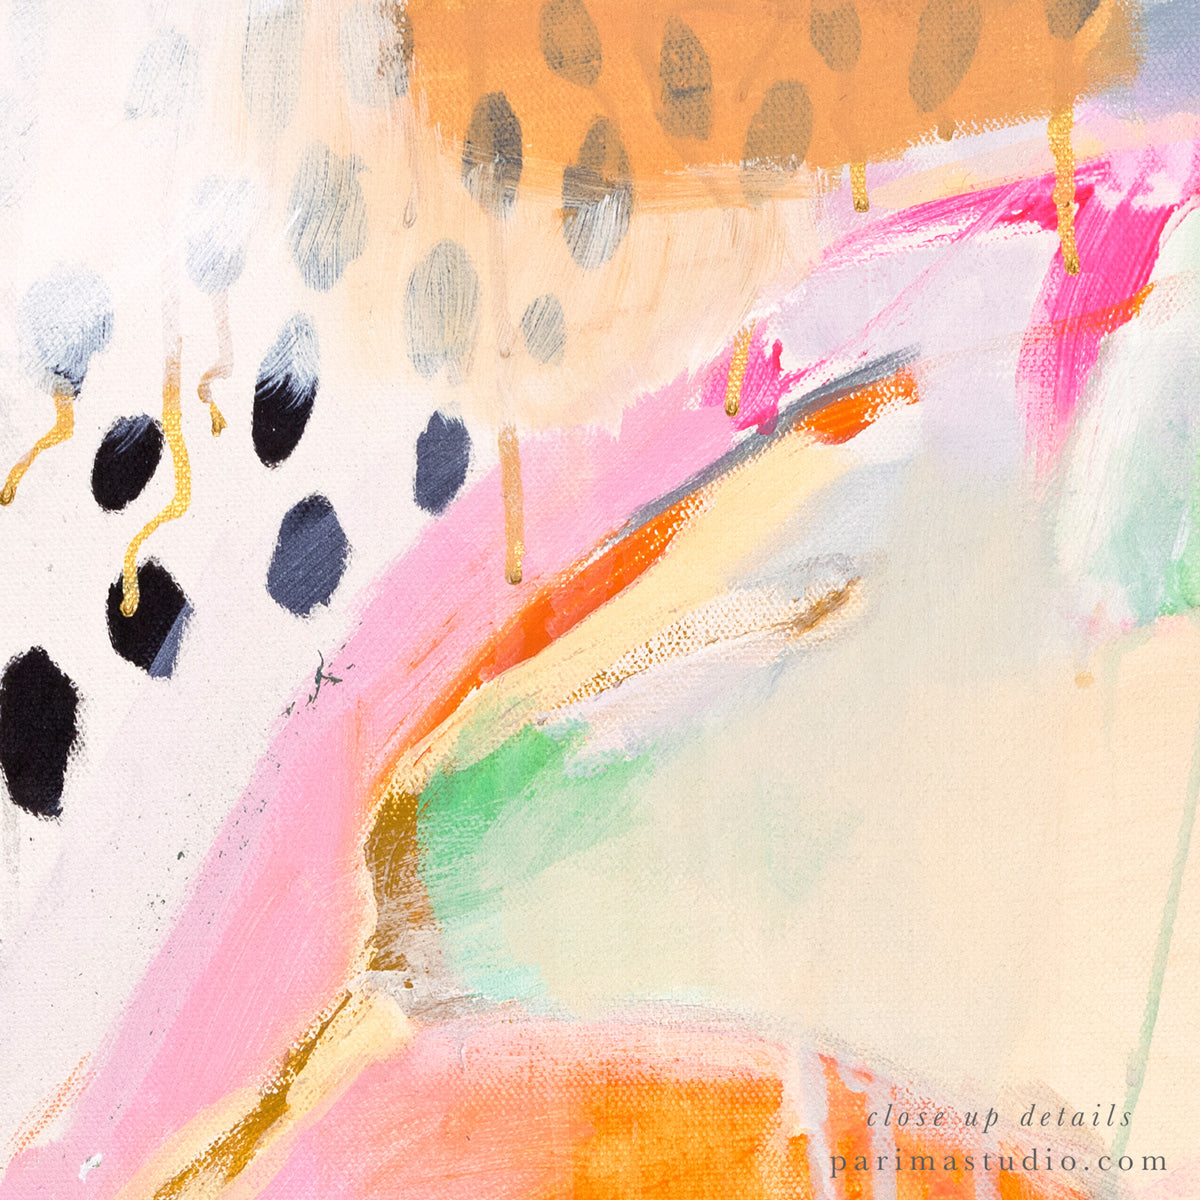 Close up details -Adira. pink and green abstract art print by Parima Studio